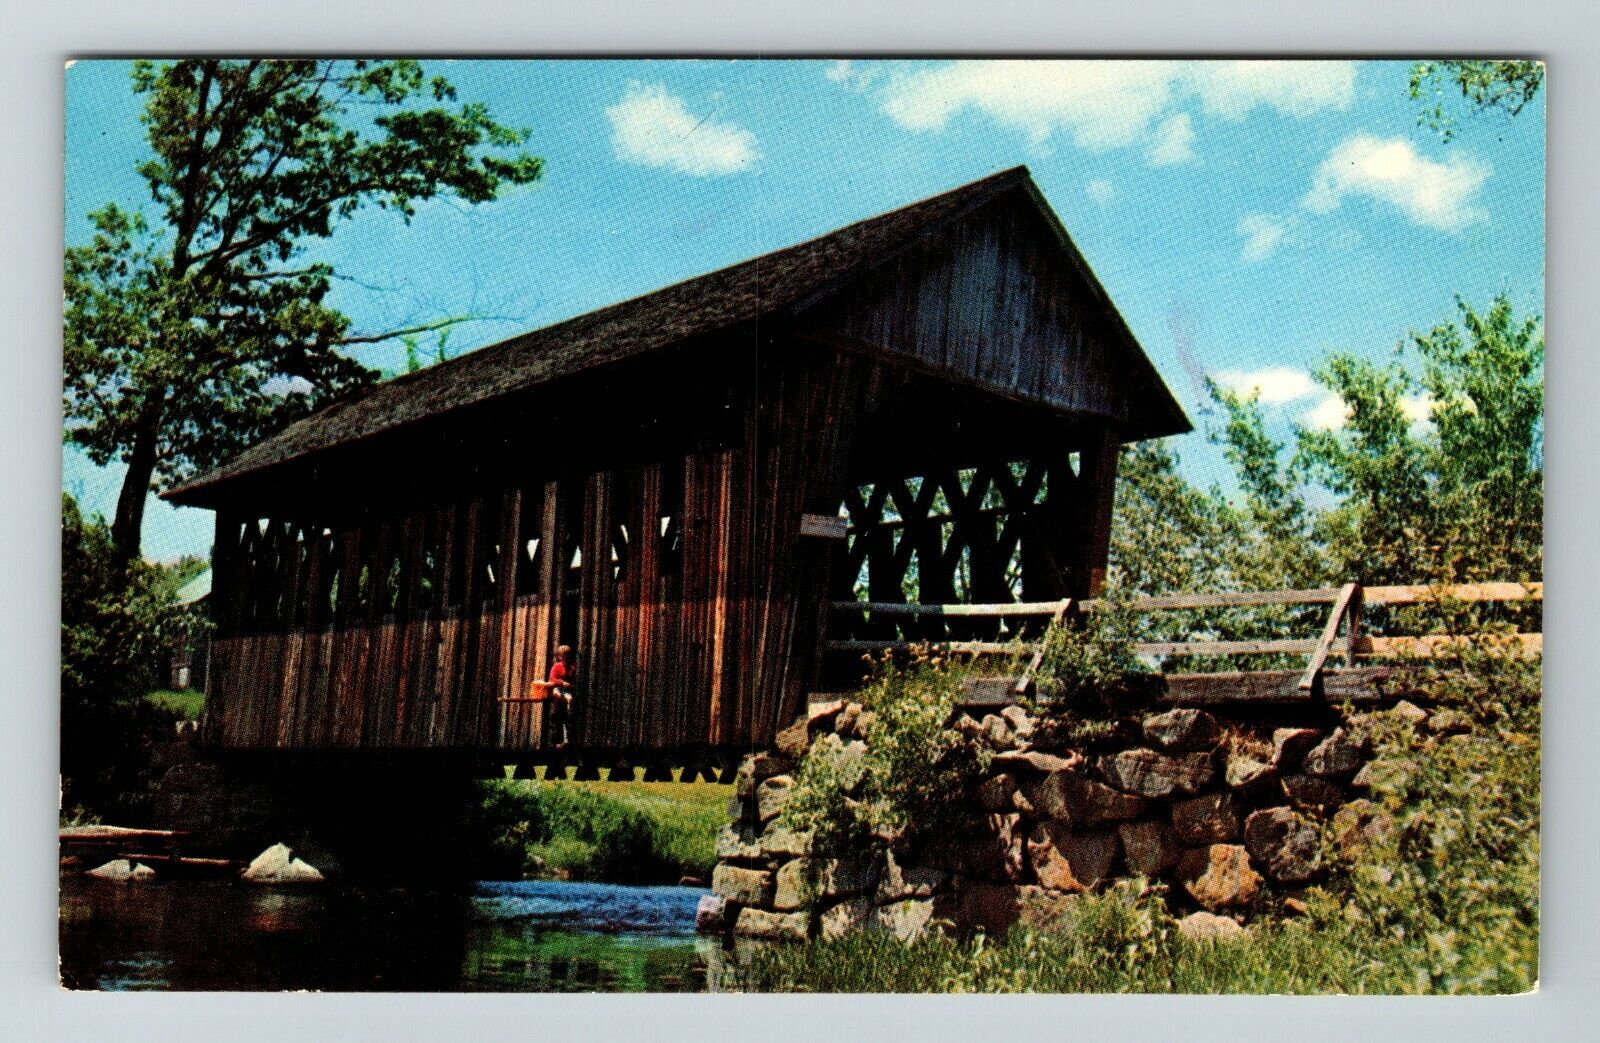 NH-New Hampshire, Old Covered Bridge, Scenic View Outside, Vintage Postcard